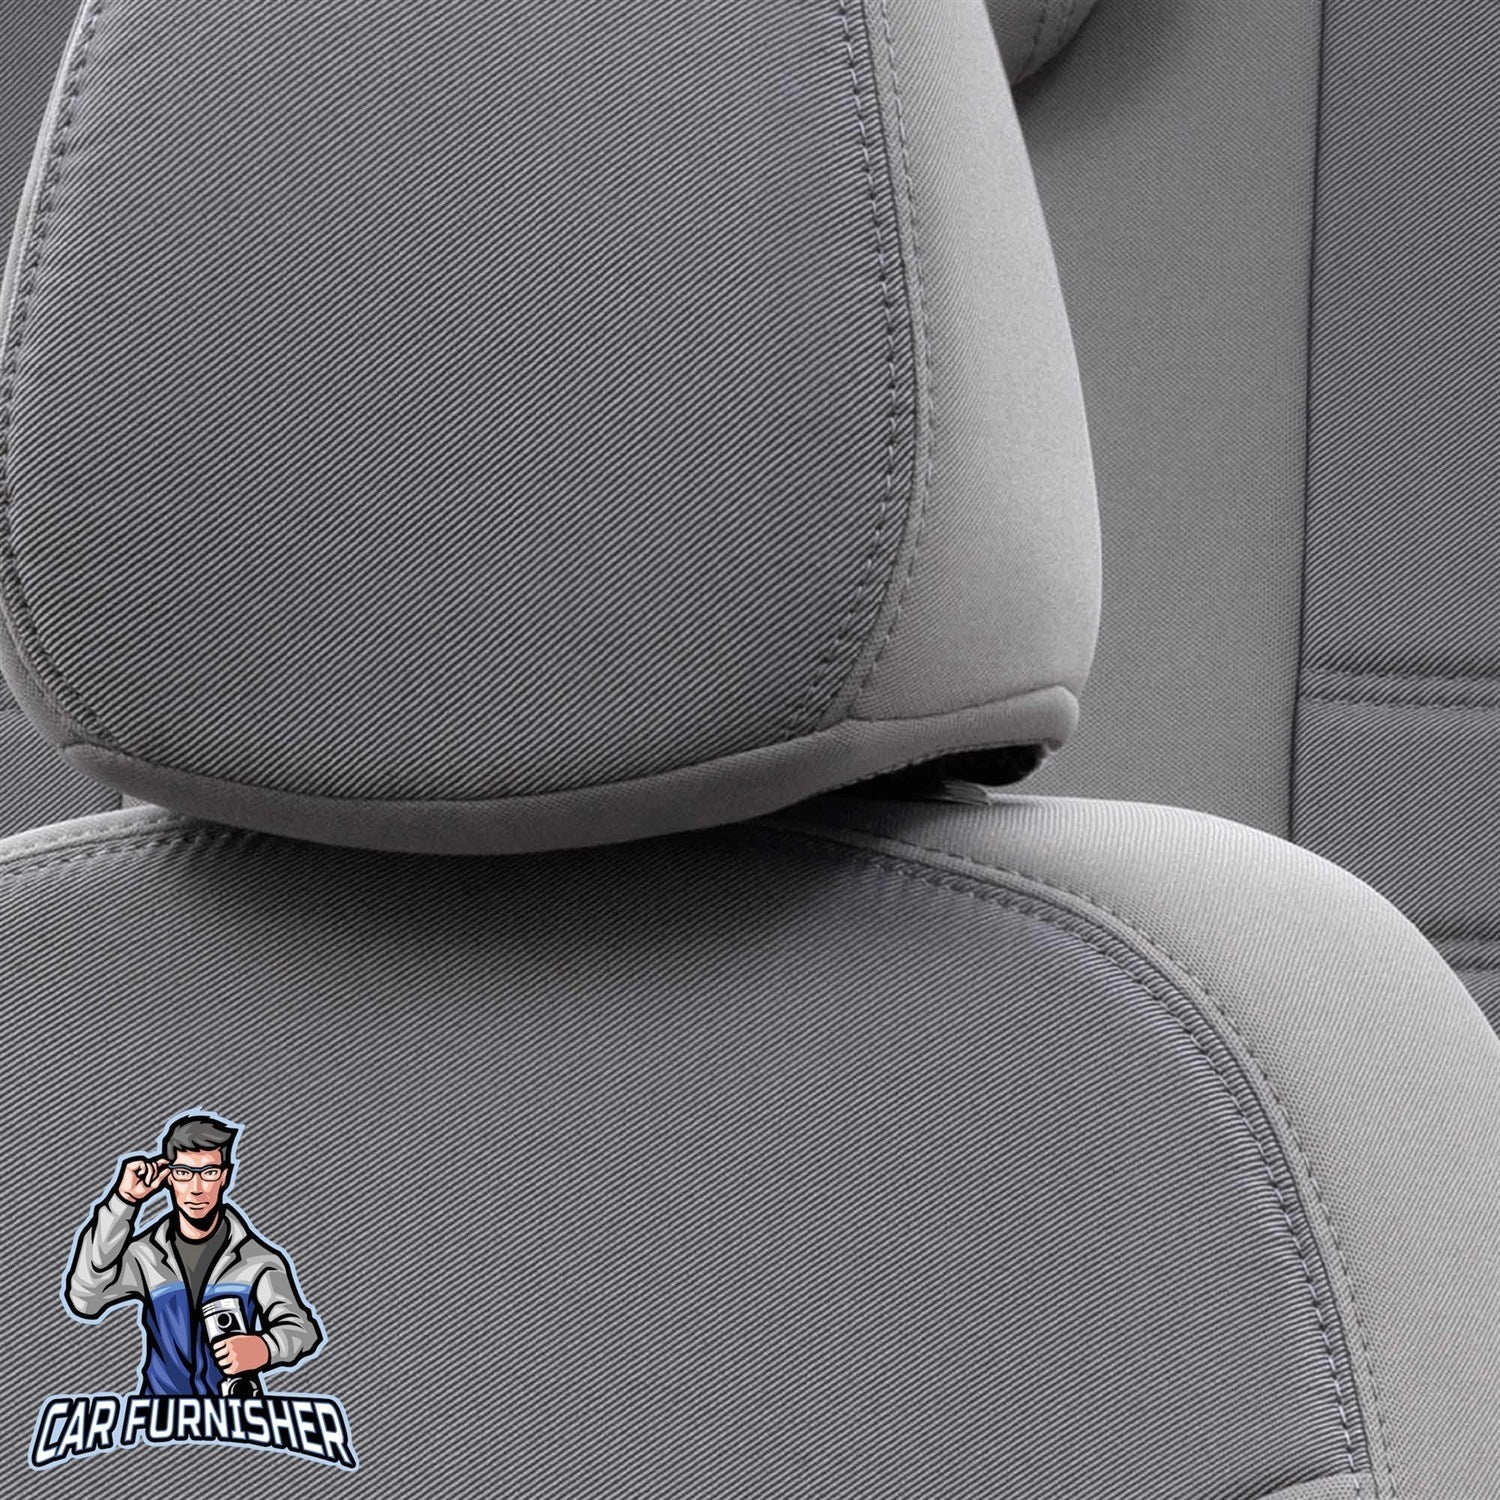 Volkswagen Sharan Seat Cover Tokyo Foal Feather Design Gray Jacquard Fabric